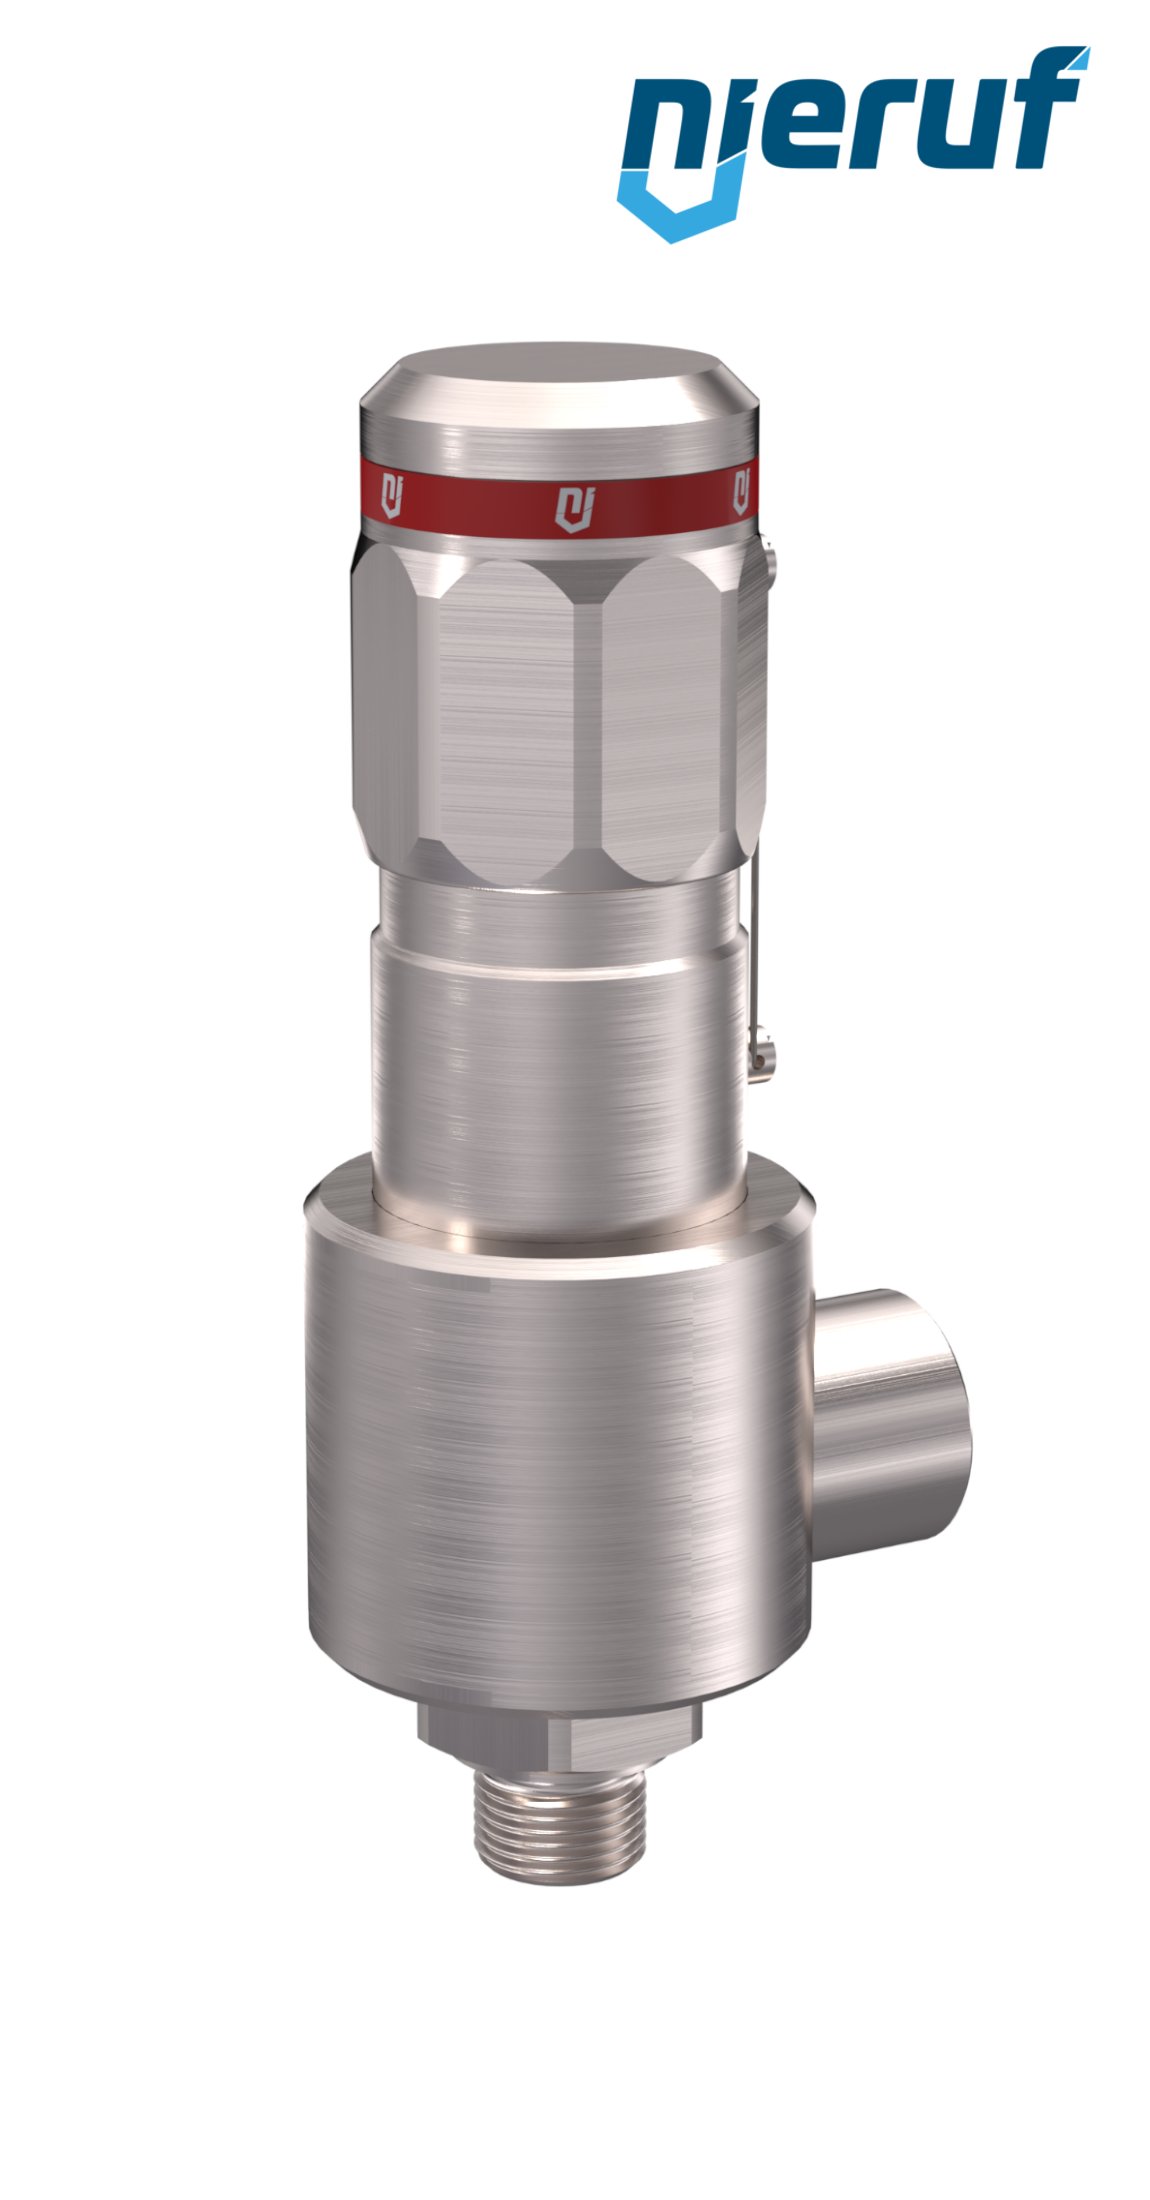 safety-valve DN8 3/4" m x 1" fm male thread NPT, SV15, MD/ PEEK, without lifting device, angle-type, 100,0 - 600,0 bar